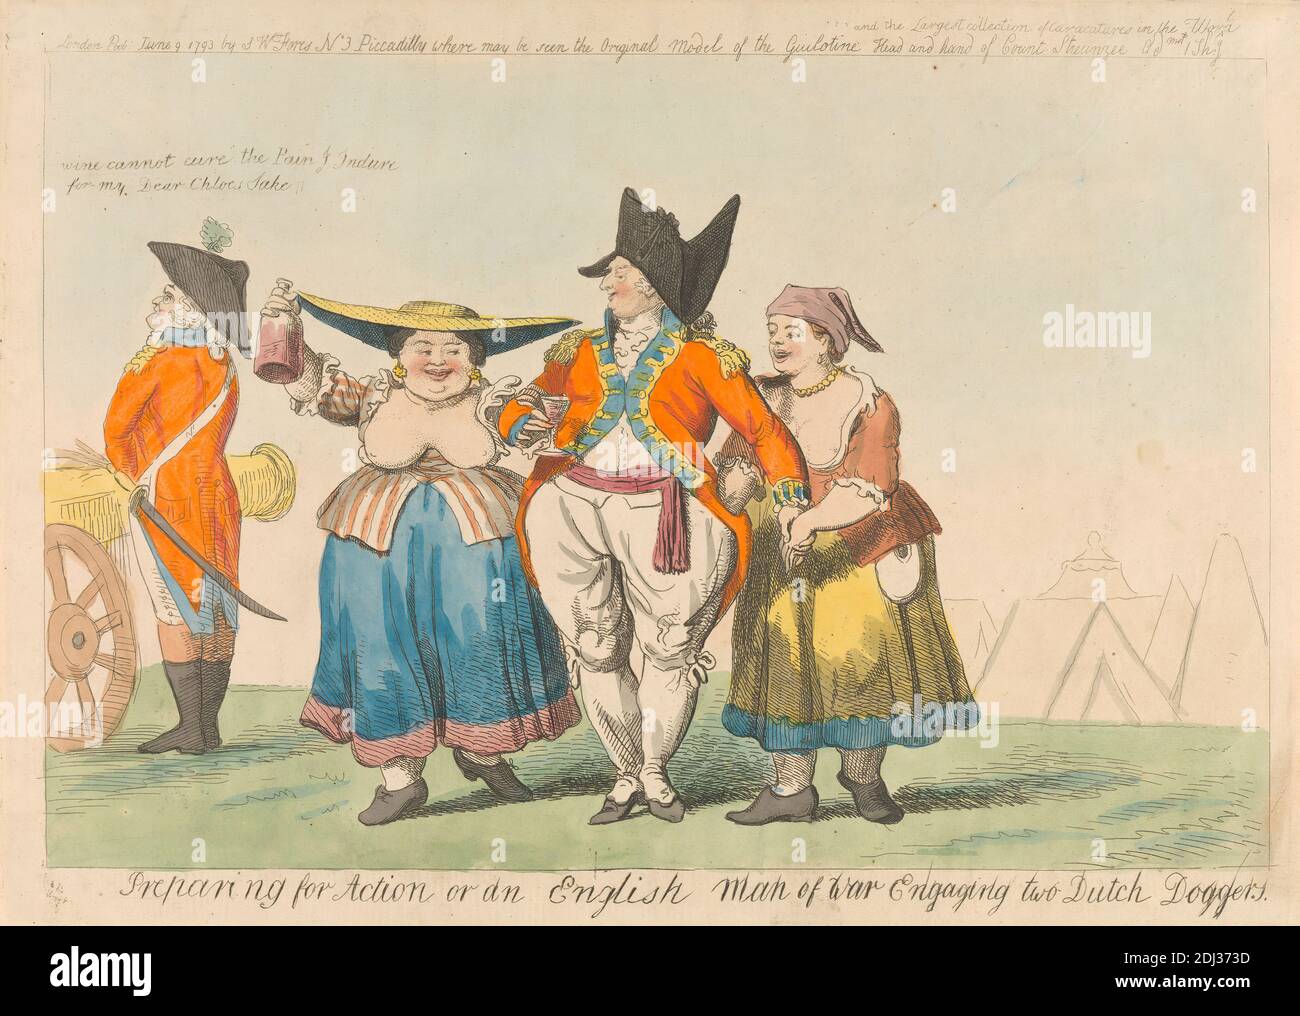 Preparing for Action o un inglese Man of War Engaging Two Doggers, Isaac Cruikshank, 1756–1810, British, 1793, Etching, Hand-colored, foglio: 8 1/2 x 12 7/8in. (21.6 x 32,7 cm Foto Stock